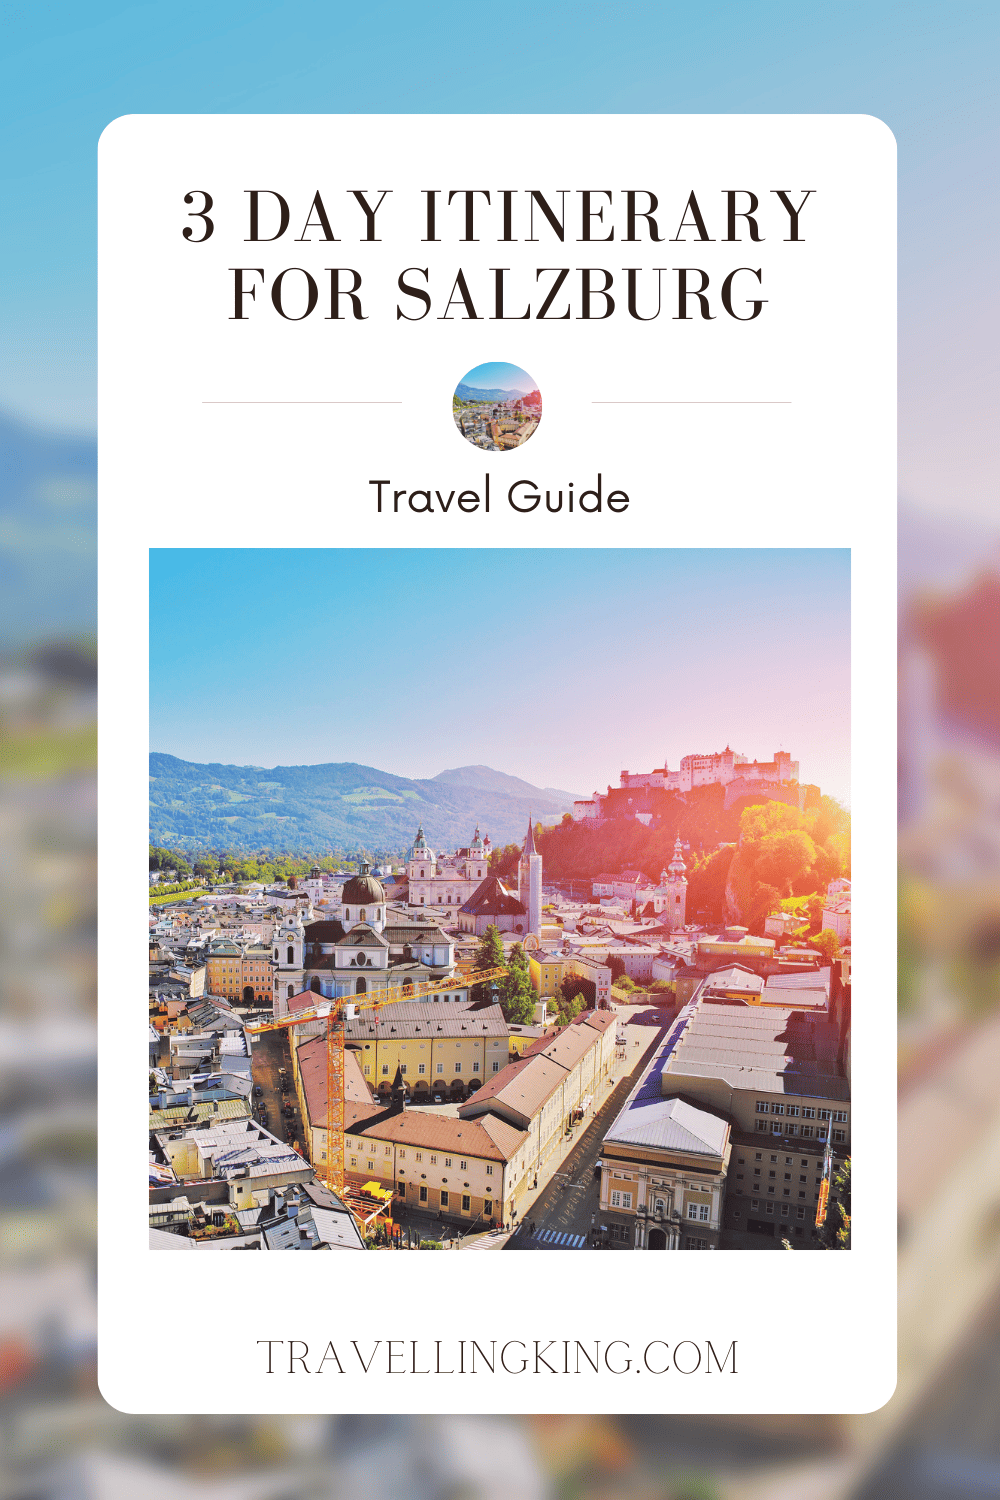 3 Day Itinerary for Salzburg